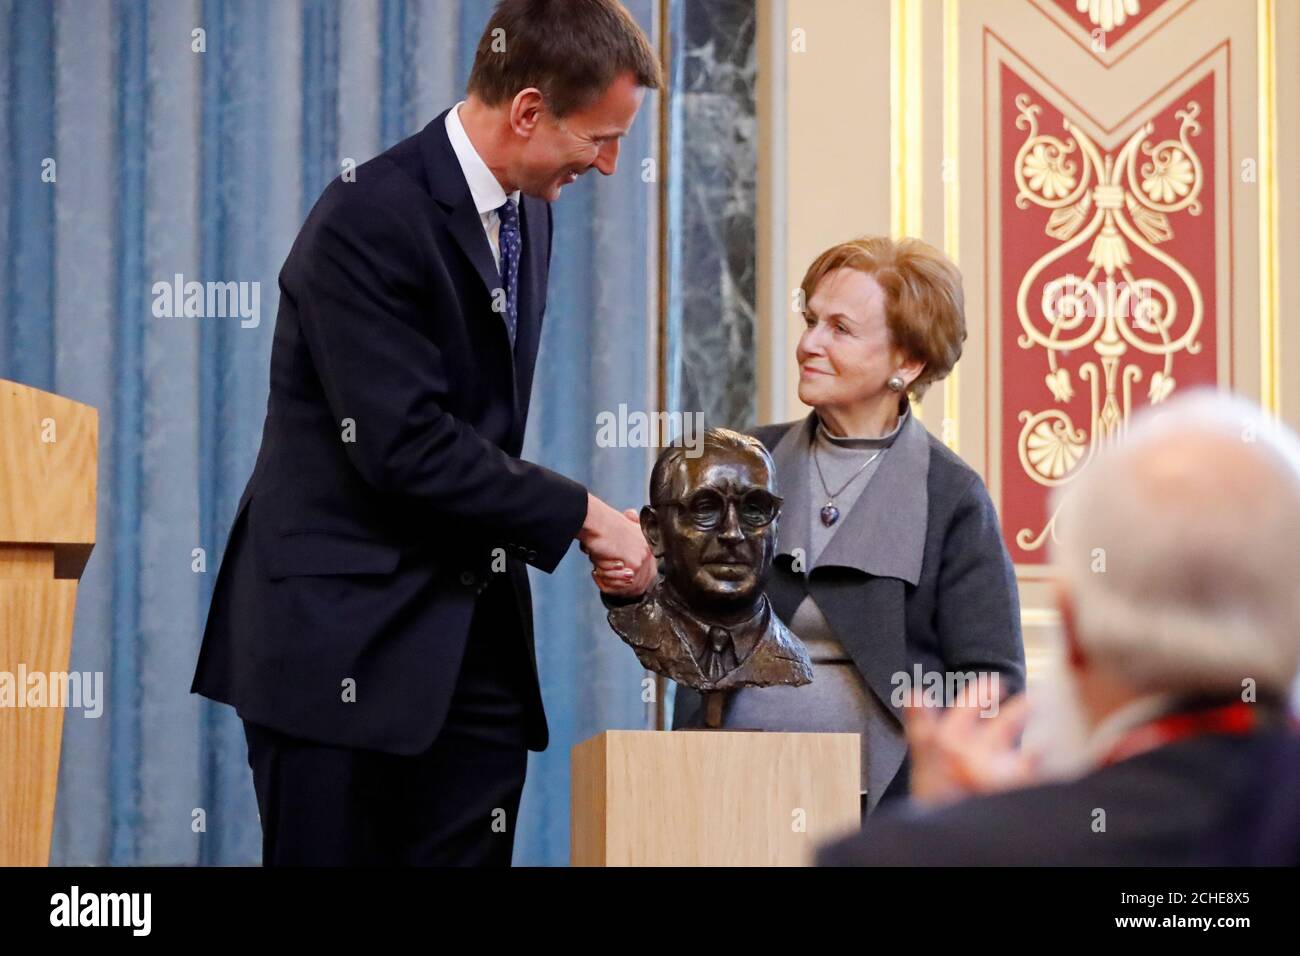 Foreign Secretary Jeremy Hunt and Holocaust survivor Mala Tribich unveil the Frank Foley bust at the annual Holocaust Memorial Day Commemoration event at the Foreign & Commonwealth Office, London. Stock Photo